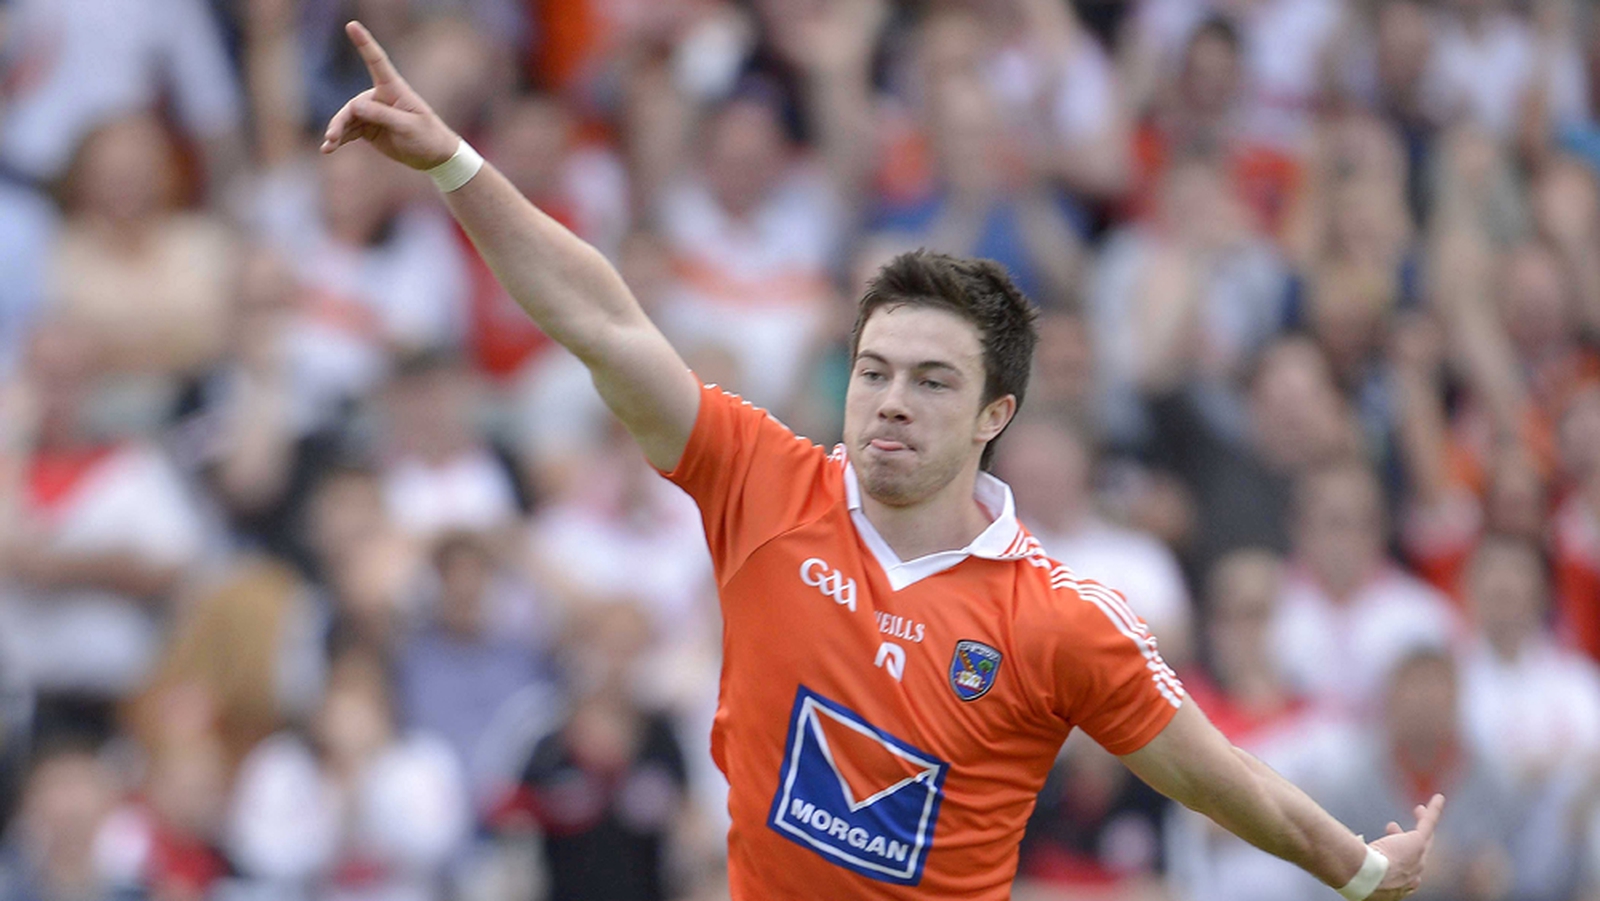 armagh-go-up-to-division-2-after-win-over-louth